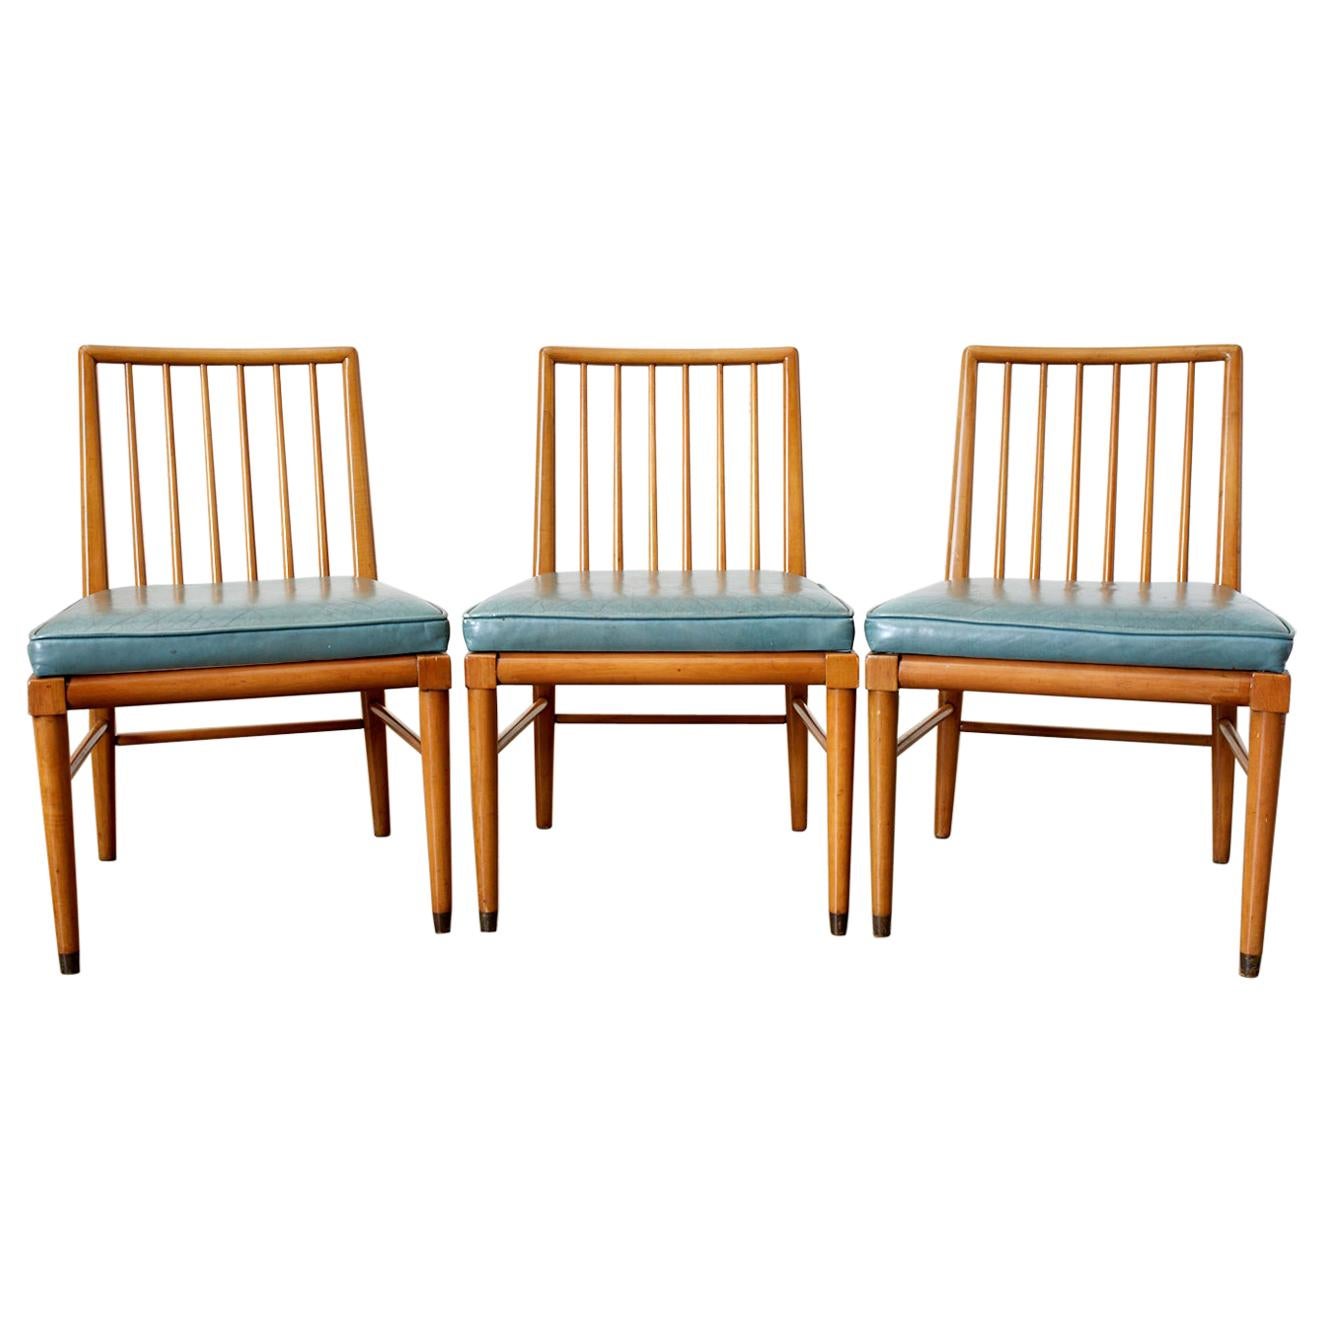 Set of Three Scandinavian Modern Spindle Back Chairs For Sale